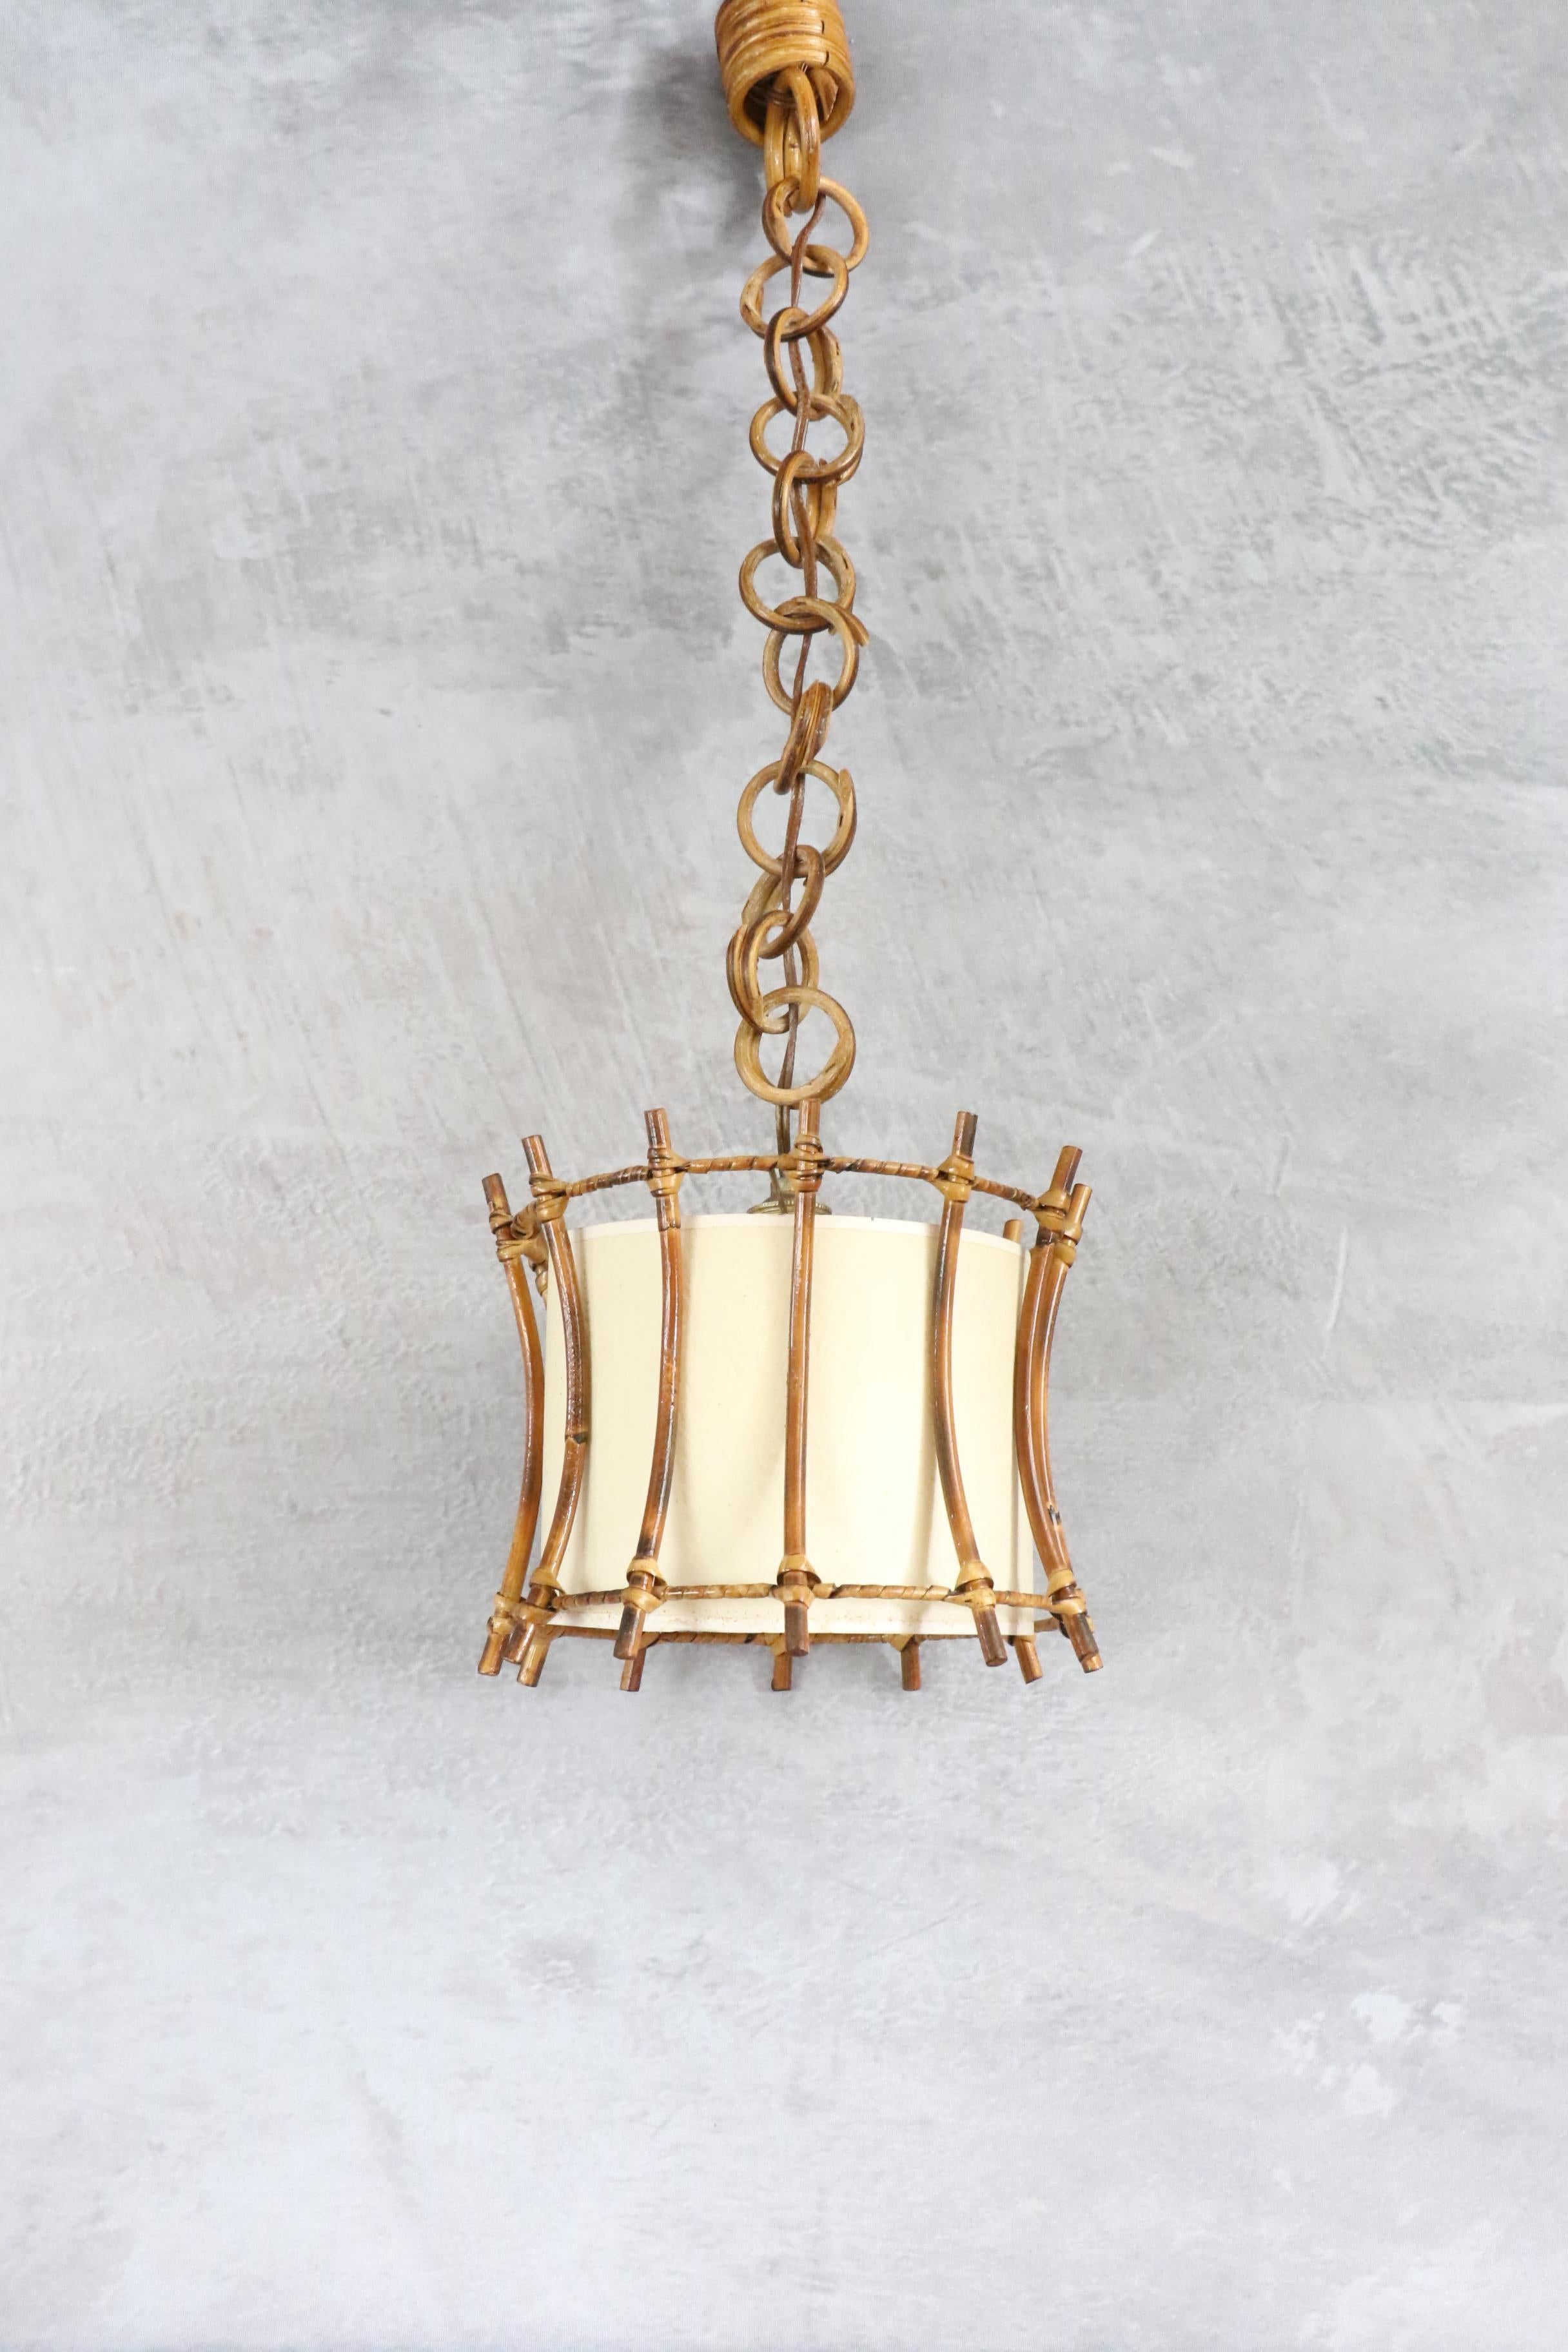 Rattan Pendant Hanging Light, Spain, 1960s

This lantern features a beautiful design with a spherical rattan structure. 
It has a paper shade inside to diffuse a soft, warm light. It is suspended from a rattan link chain. The length of the chain can